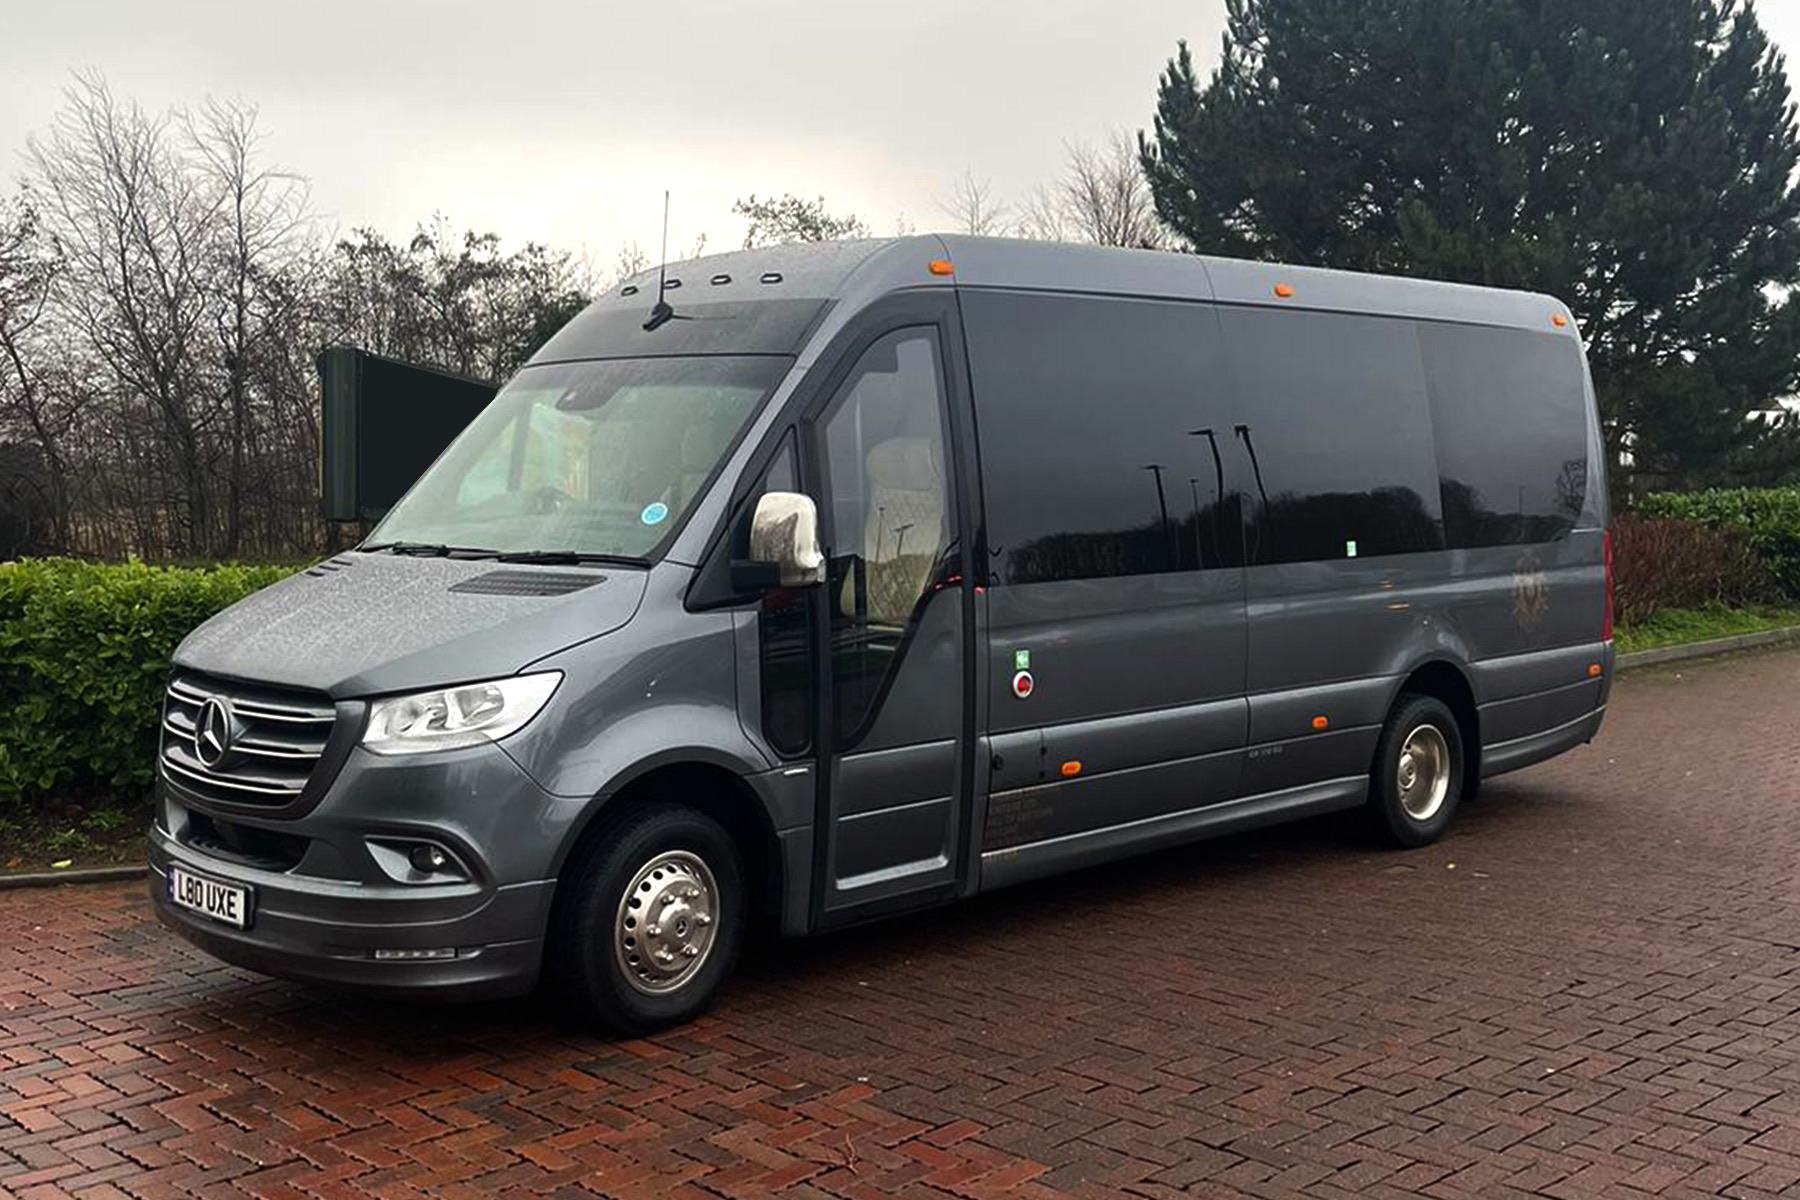 Planning a Group Trip in Manchester: Why Minibus Hire Might Be Your Best Option